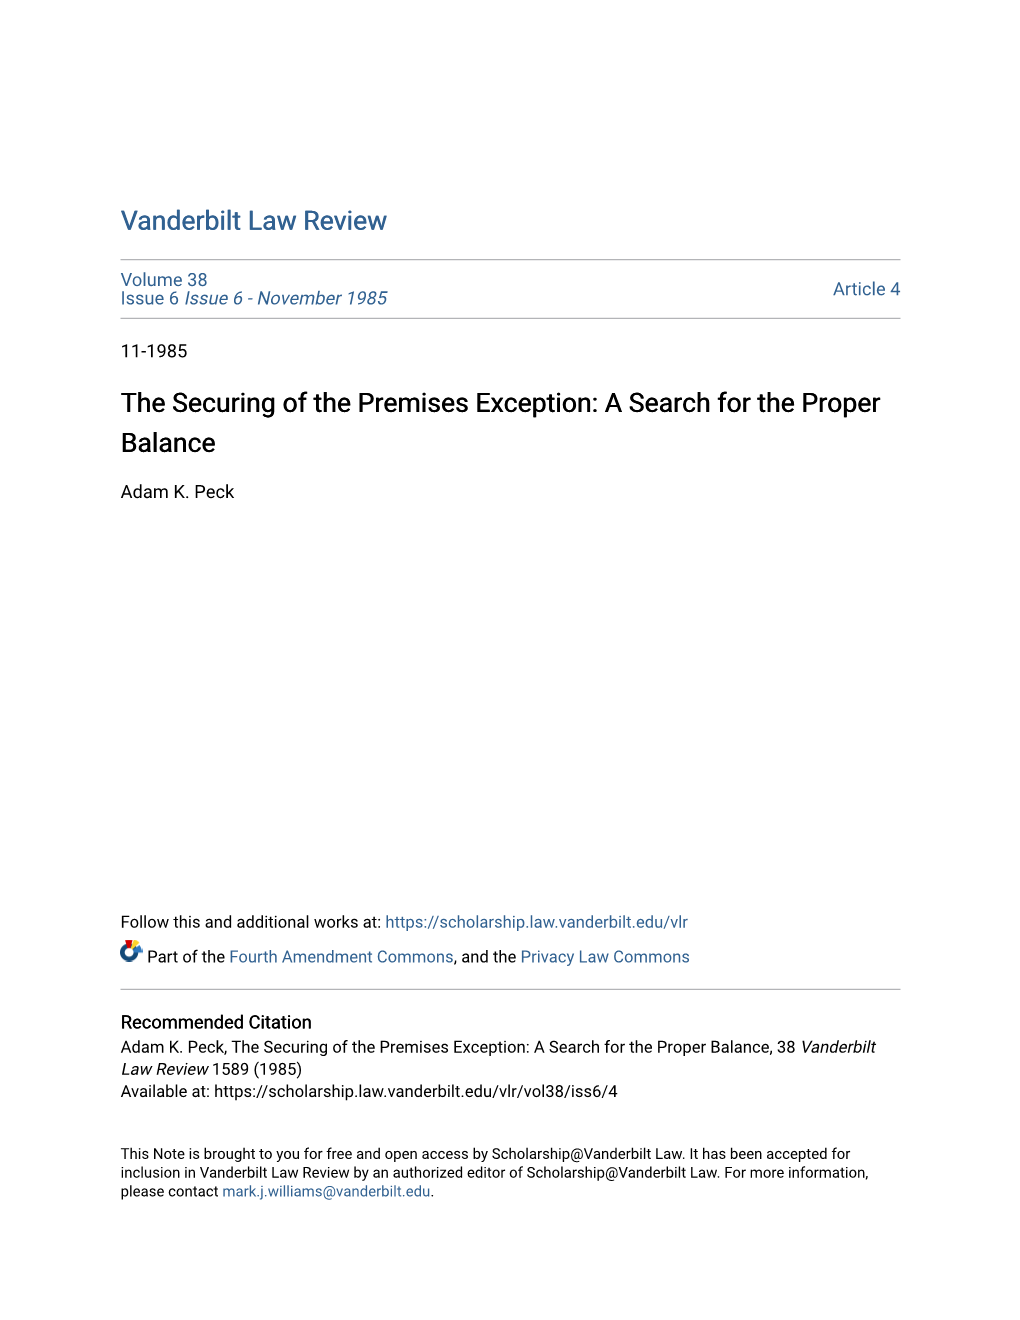 The Securing of the Premises Exception: a Search for the Proper Balance